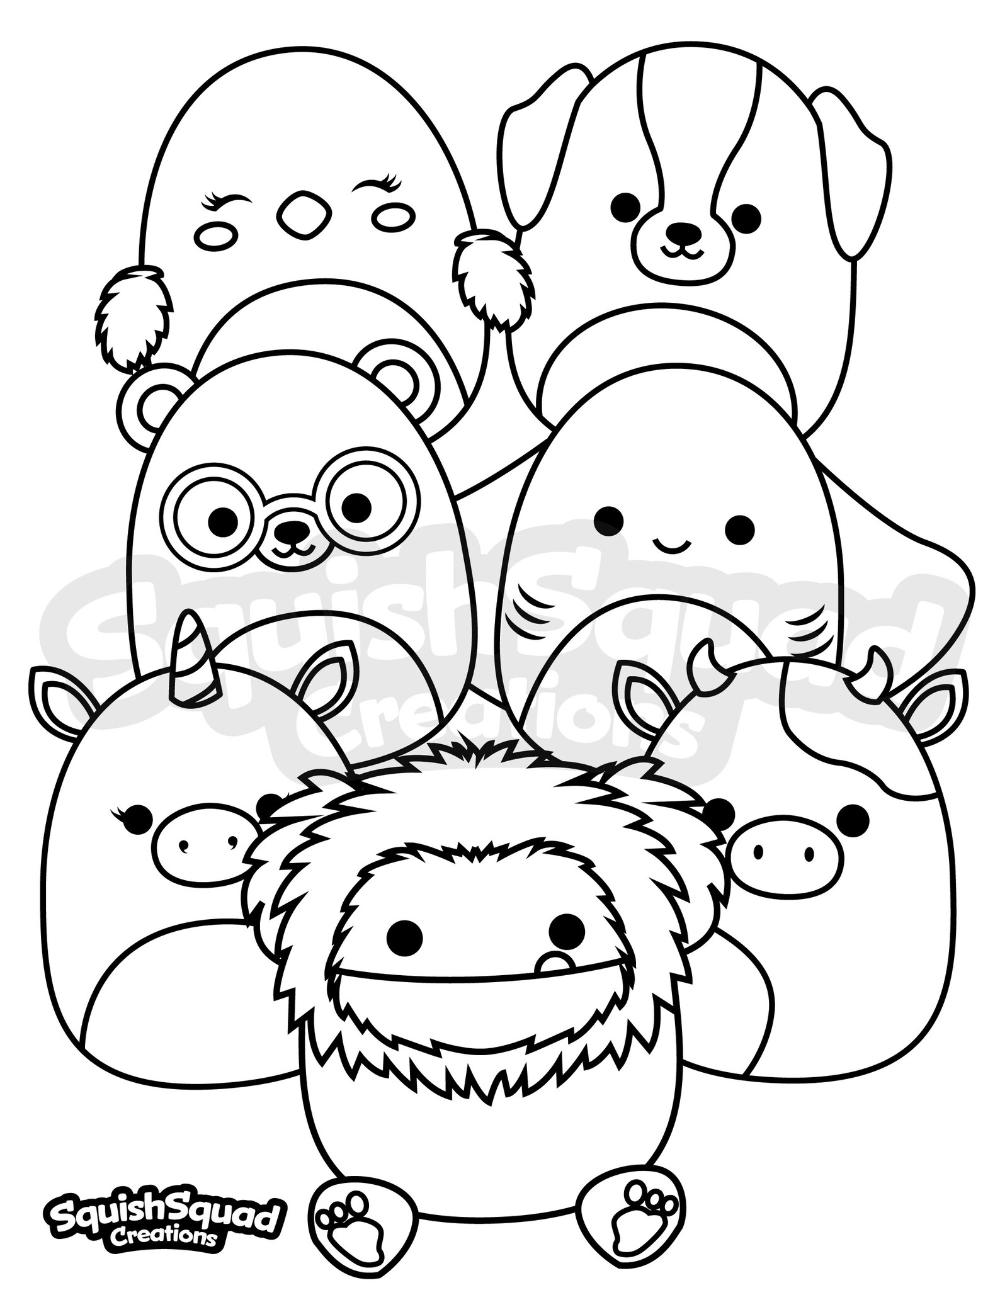 Squishmallow Coloring Page Printable Squishmallow Coloring - Etsy | Easy coloring  pages, Cute coloring pages, Cool coloring pages